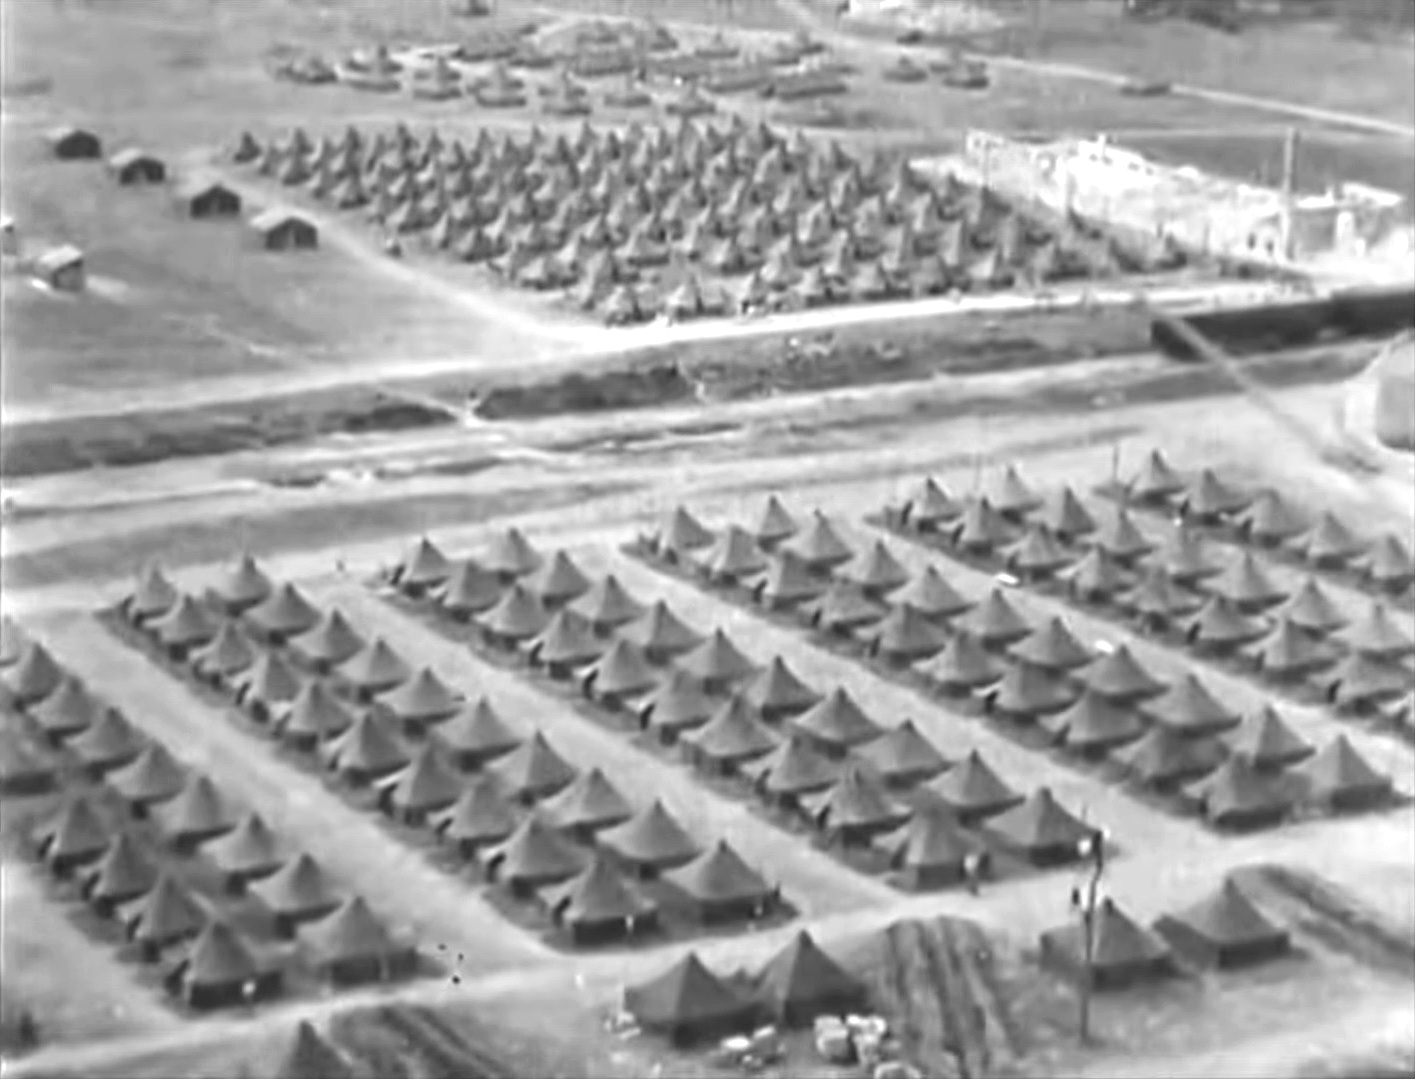 View of the Poltava tent city as seen from an arriving B-17 Fortress on an Operation Frantic mission, Poltava, Ukraine, summer 1944 (still image from an Army Signal Corps movie film).